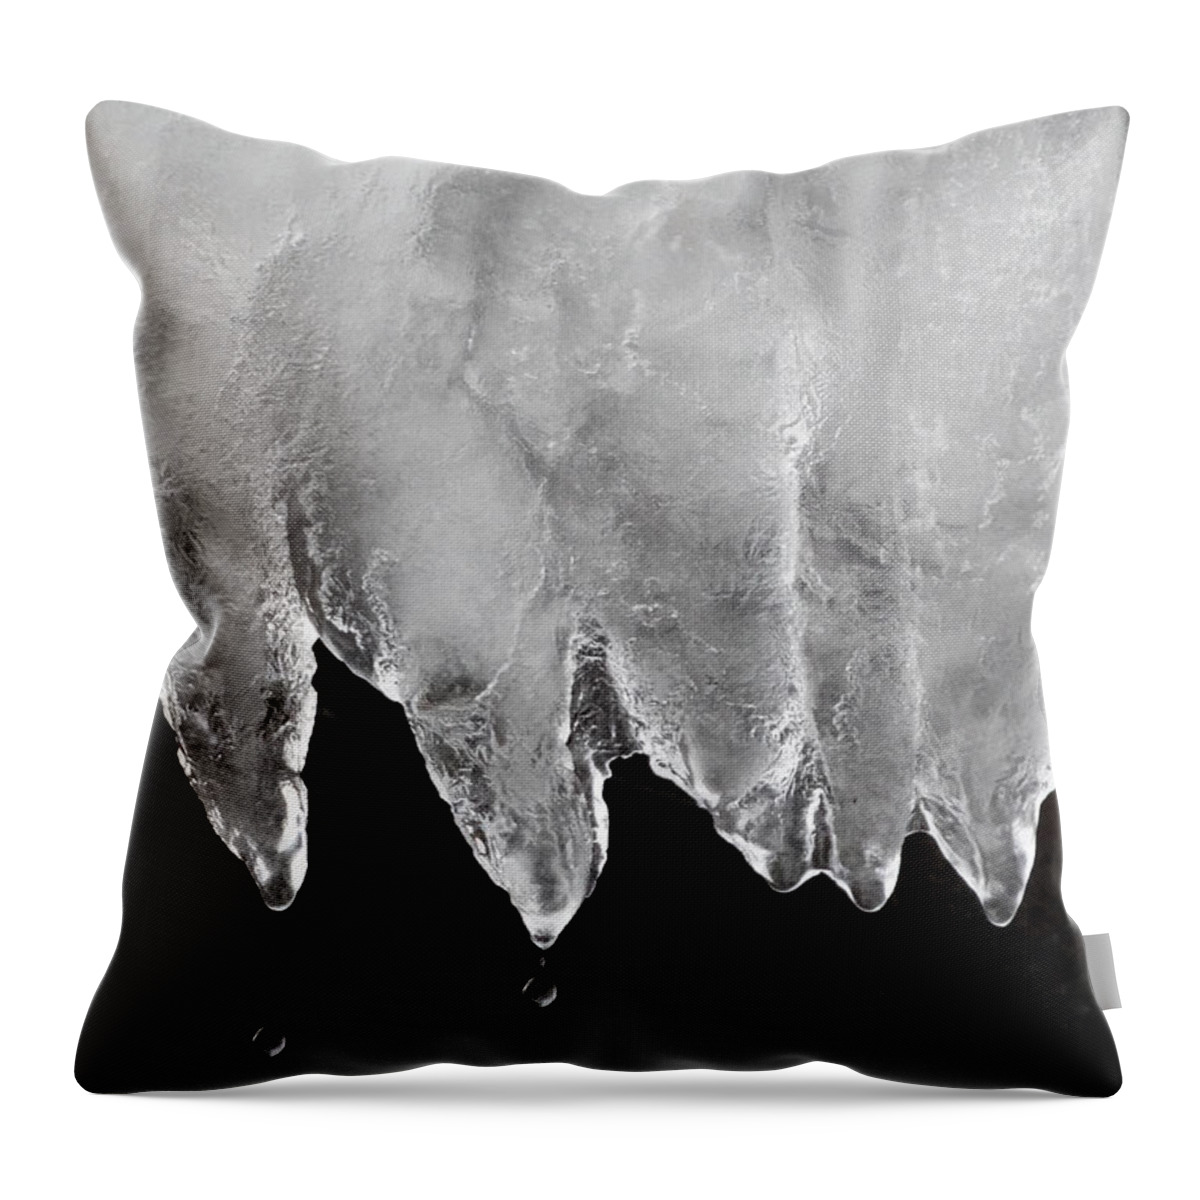 Winter Throw Pillow featuring the photograph Drips by David T Wilkinson